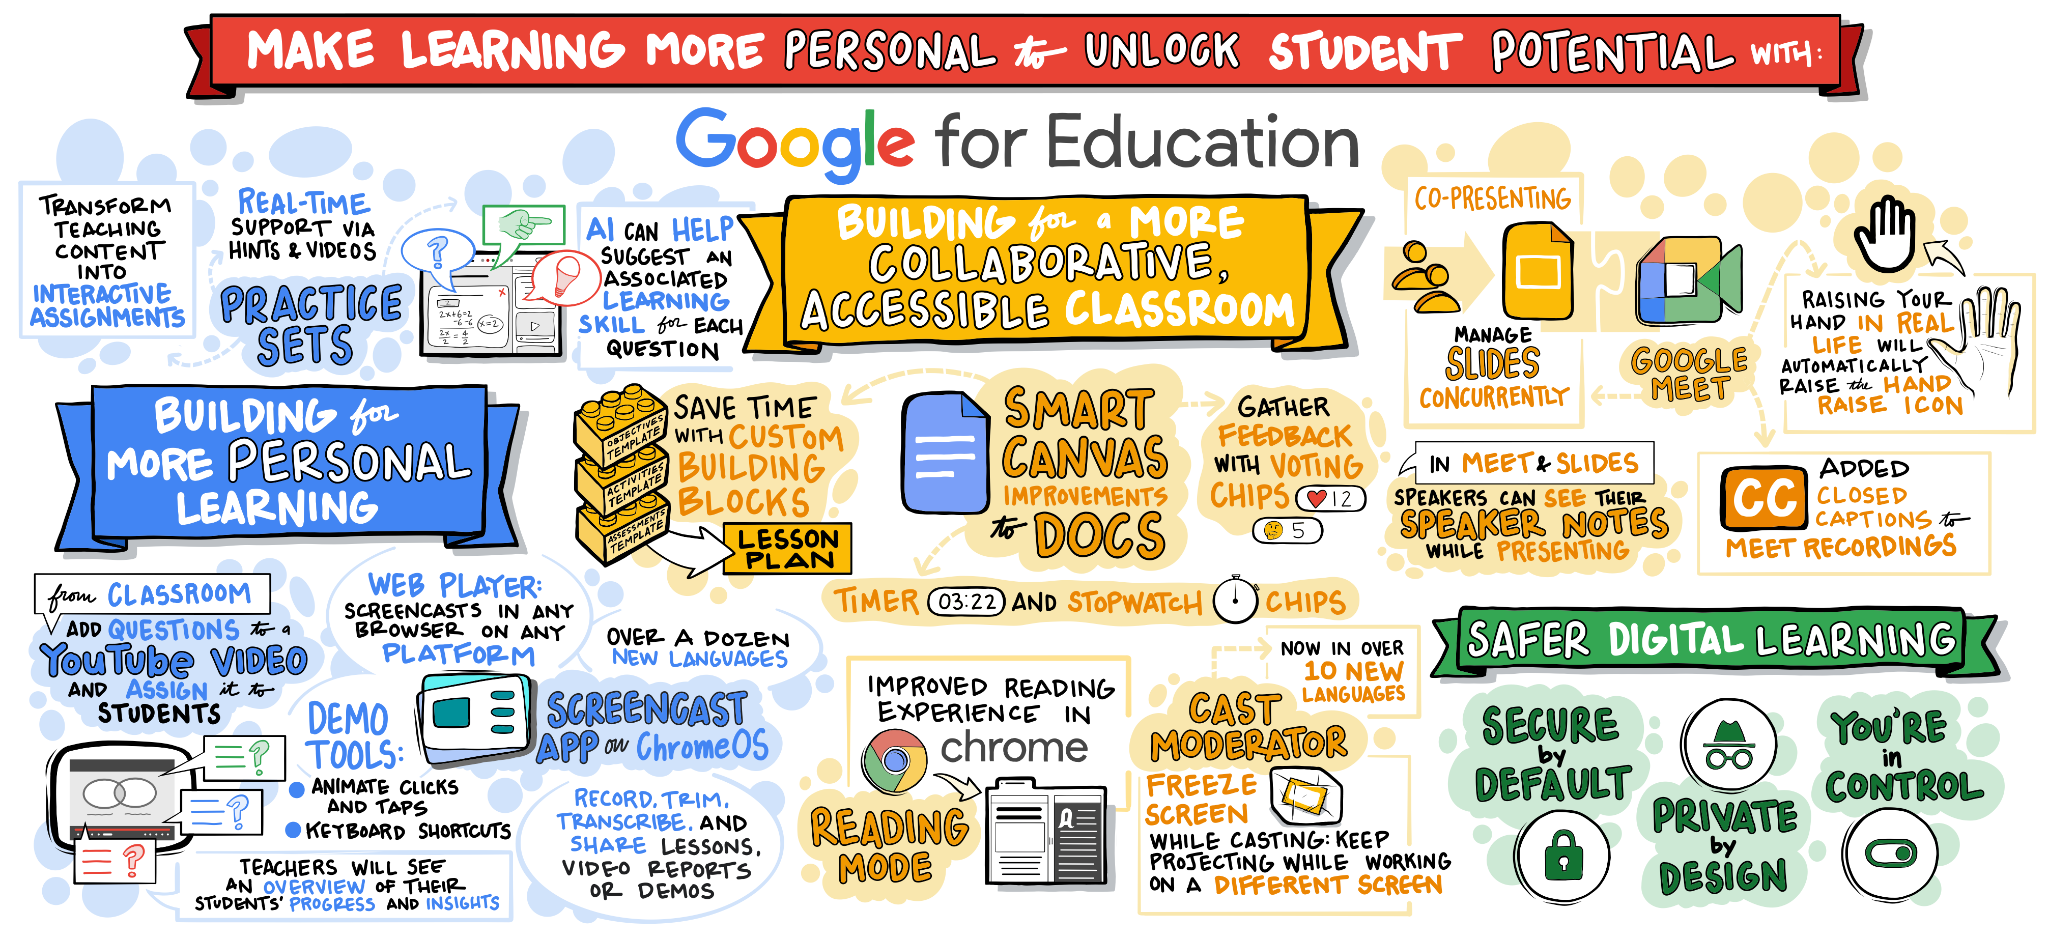 Top 4 Favourite Google for Education Features Coming Soon